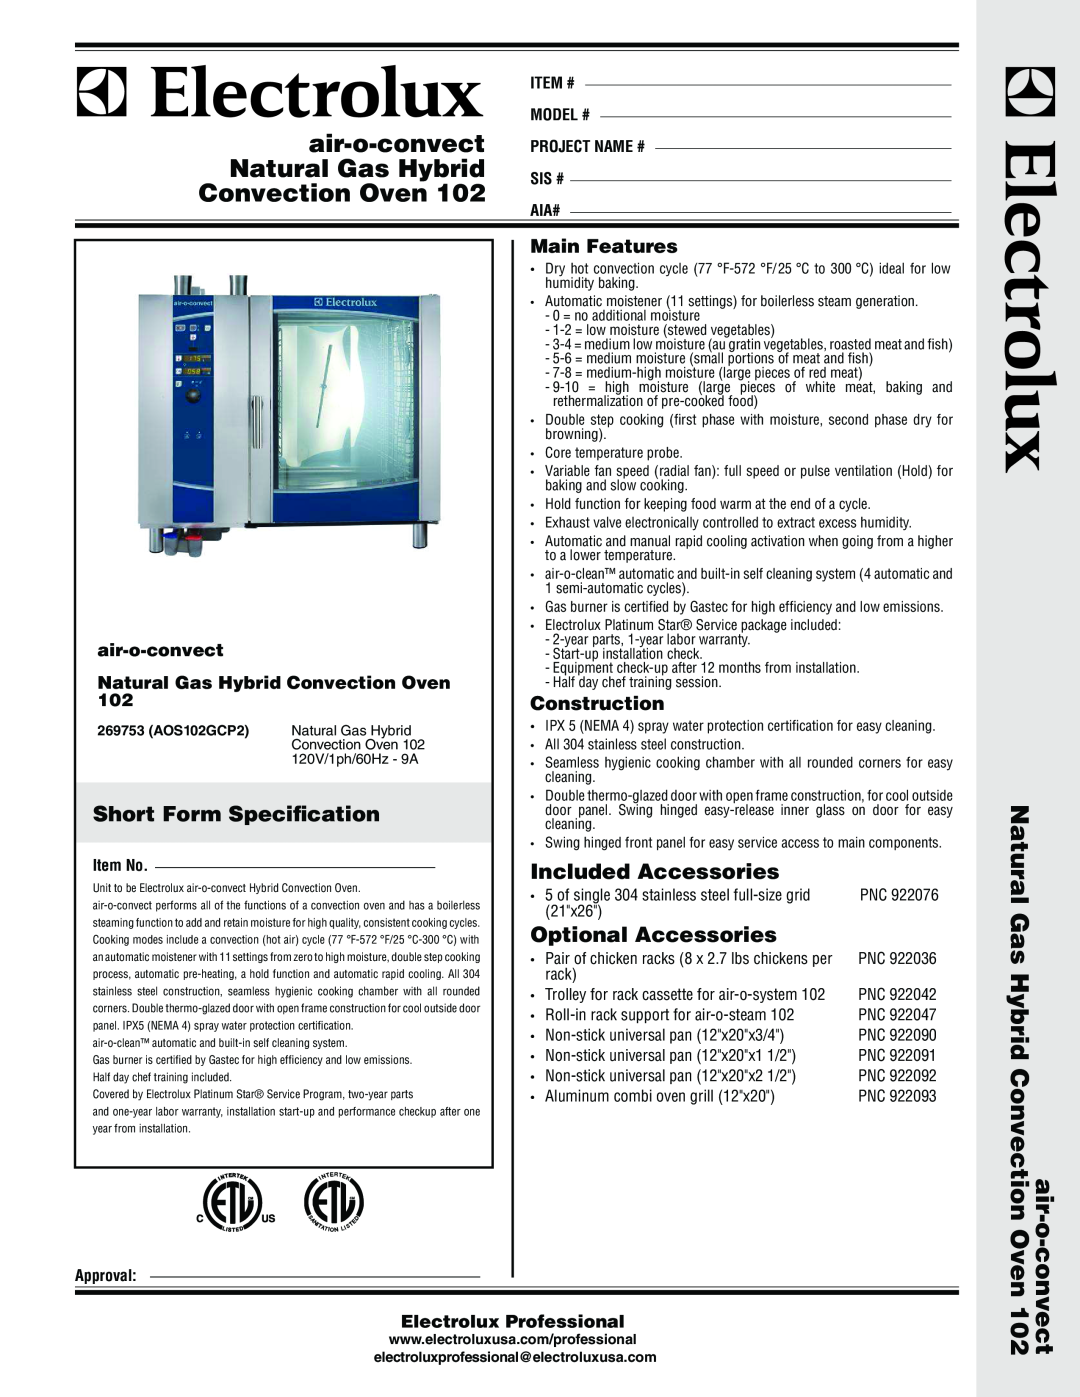 Electrolux 102 warranty Short Form Speciﬁcation, Included Accessories, Optional Accessories, air-o-convect, Main Features 